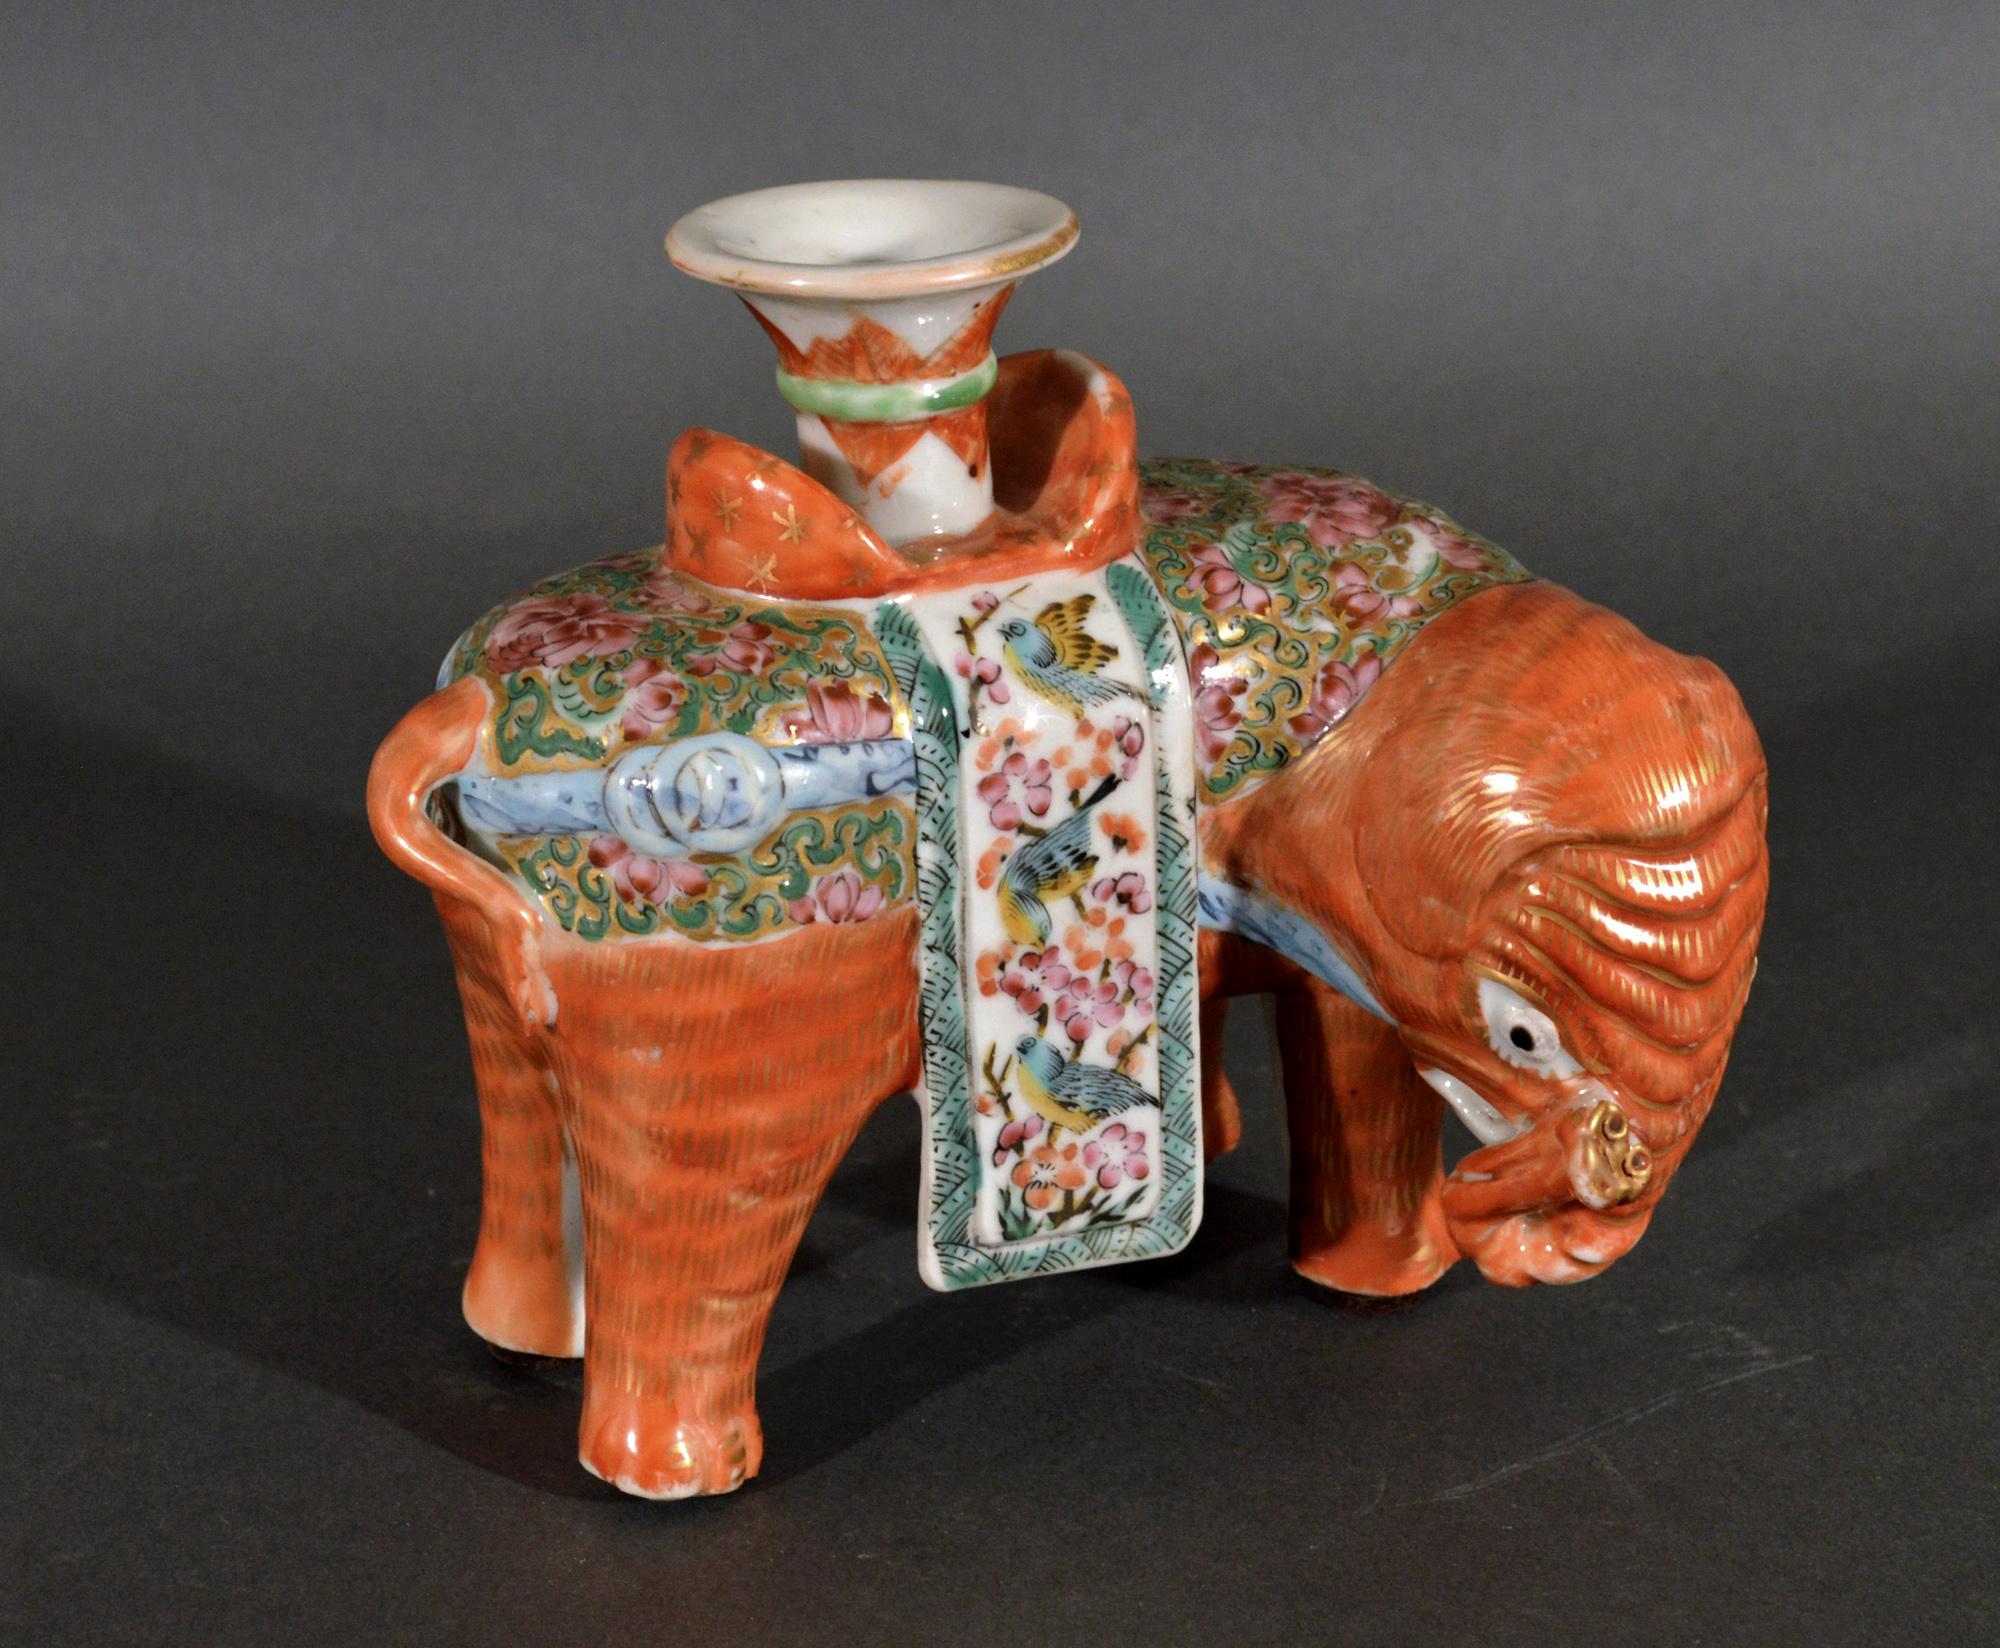 Chinese Export Porcelain Canton Famille Rose Elephant Modeled as a Candlestick 2